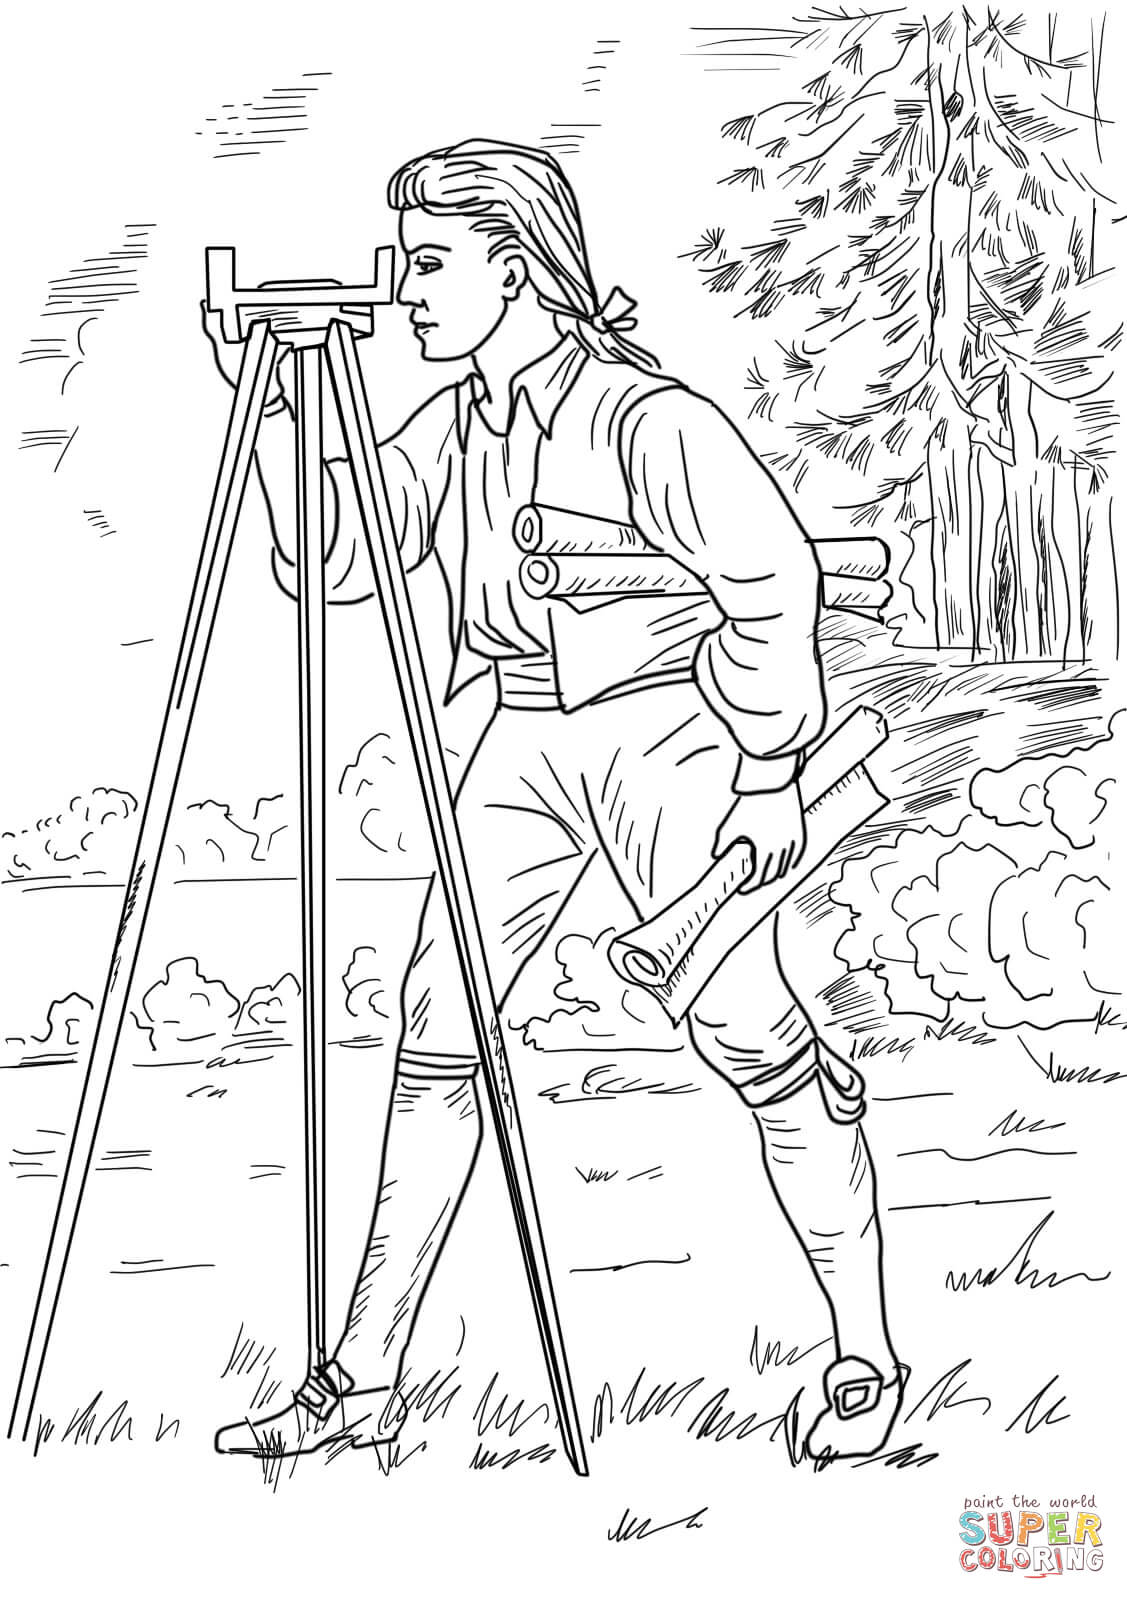 Young george washington surveyor and mapmaker coloring page free printable coloring pages